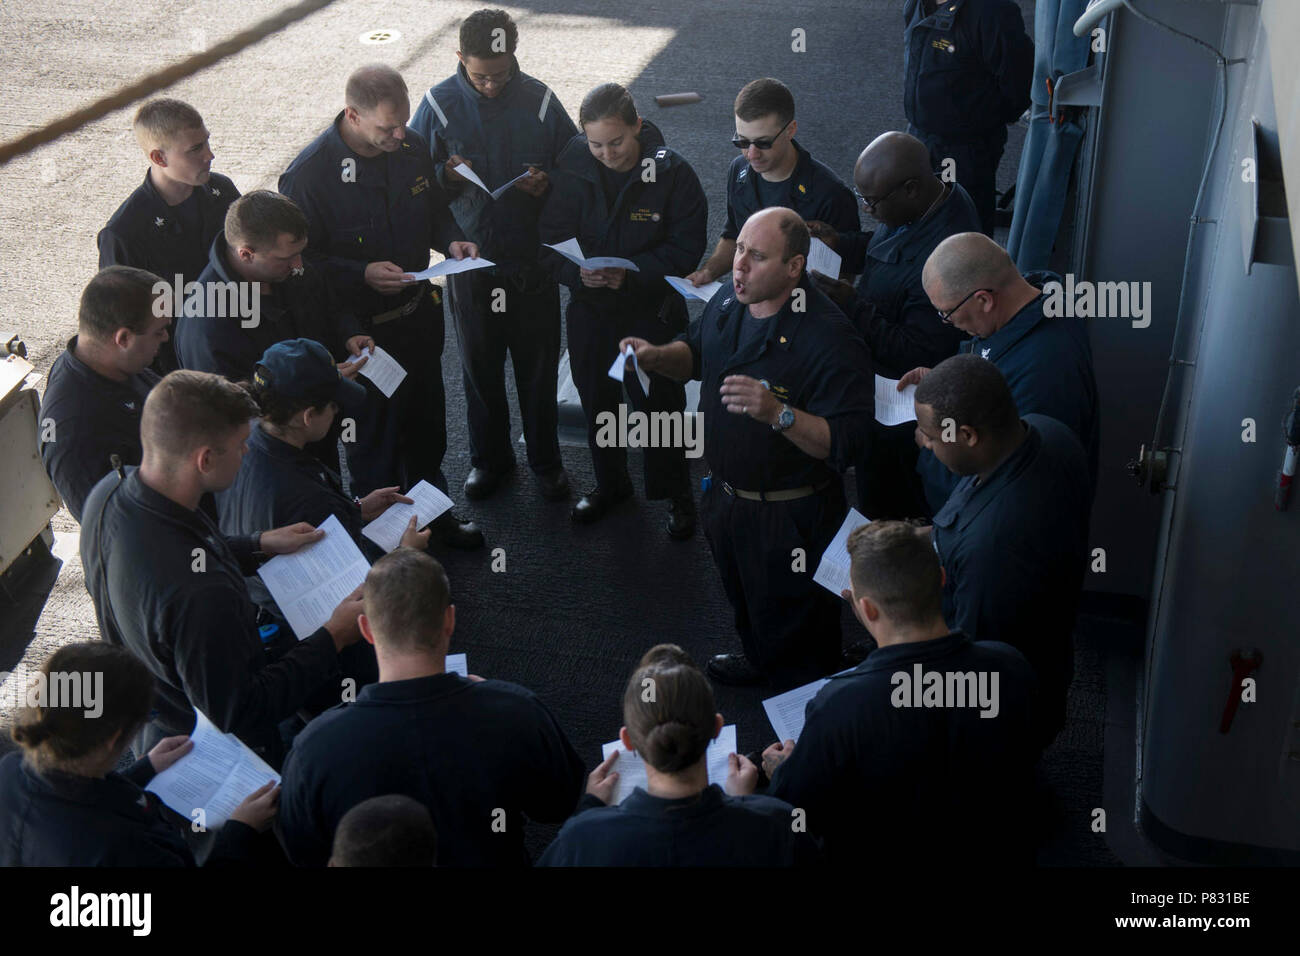 PACIFIC OCEAN (Oct. 3, 2016) Lt. Josh Sherwin, a Navy chaplain, leads a Rosh Hashanah ceremony on USS John C. Stennis' (CVN 74) fantail. Rosh Hashanah is a two-day celebration of the Jewish New Year and provides the opportunity to reflect on the past year and look ahead in the New Year. Sherwin, one of ten rabbis in the Navy, visited John C. Stennis at sea to provide religious services for the crew during the High Holy Days. John C. Stennis is underway conducting proficiency and sustainment training. Stock Photo